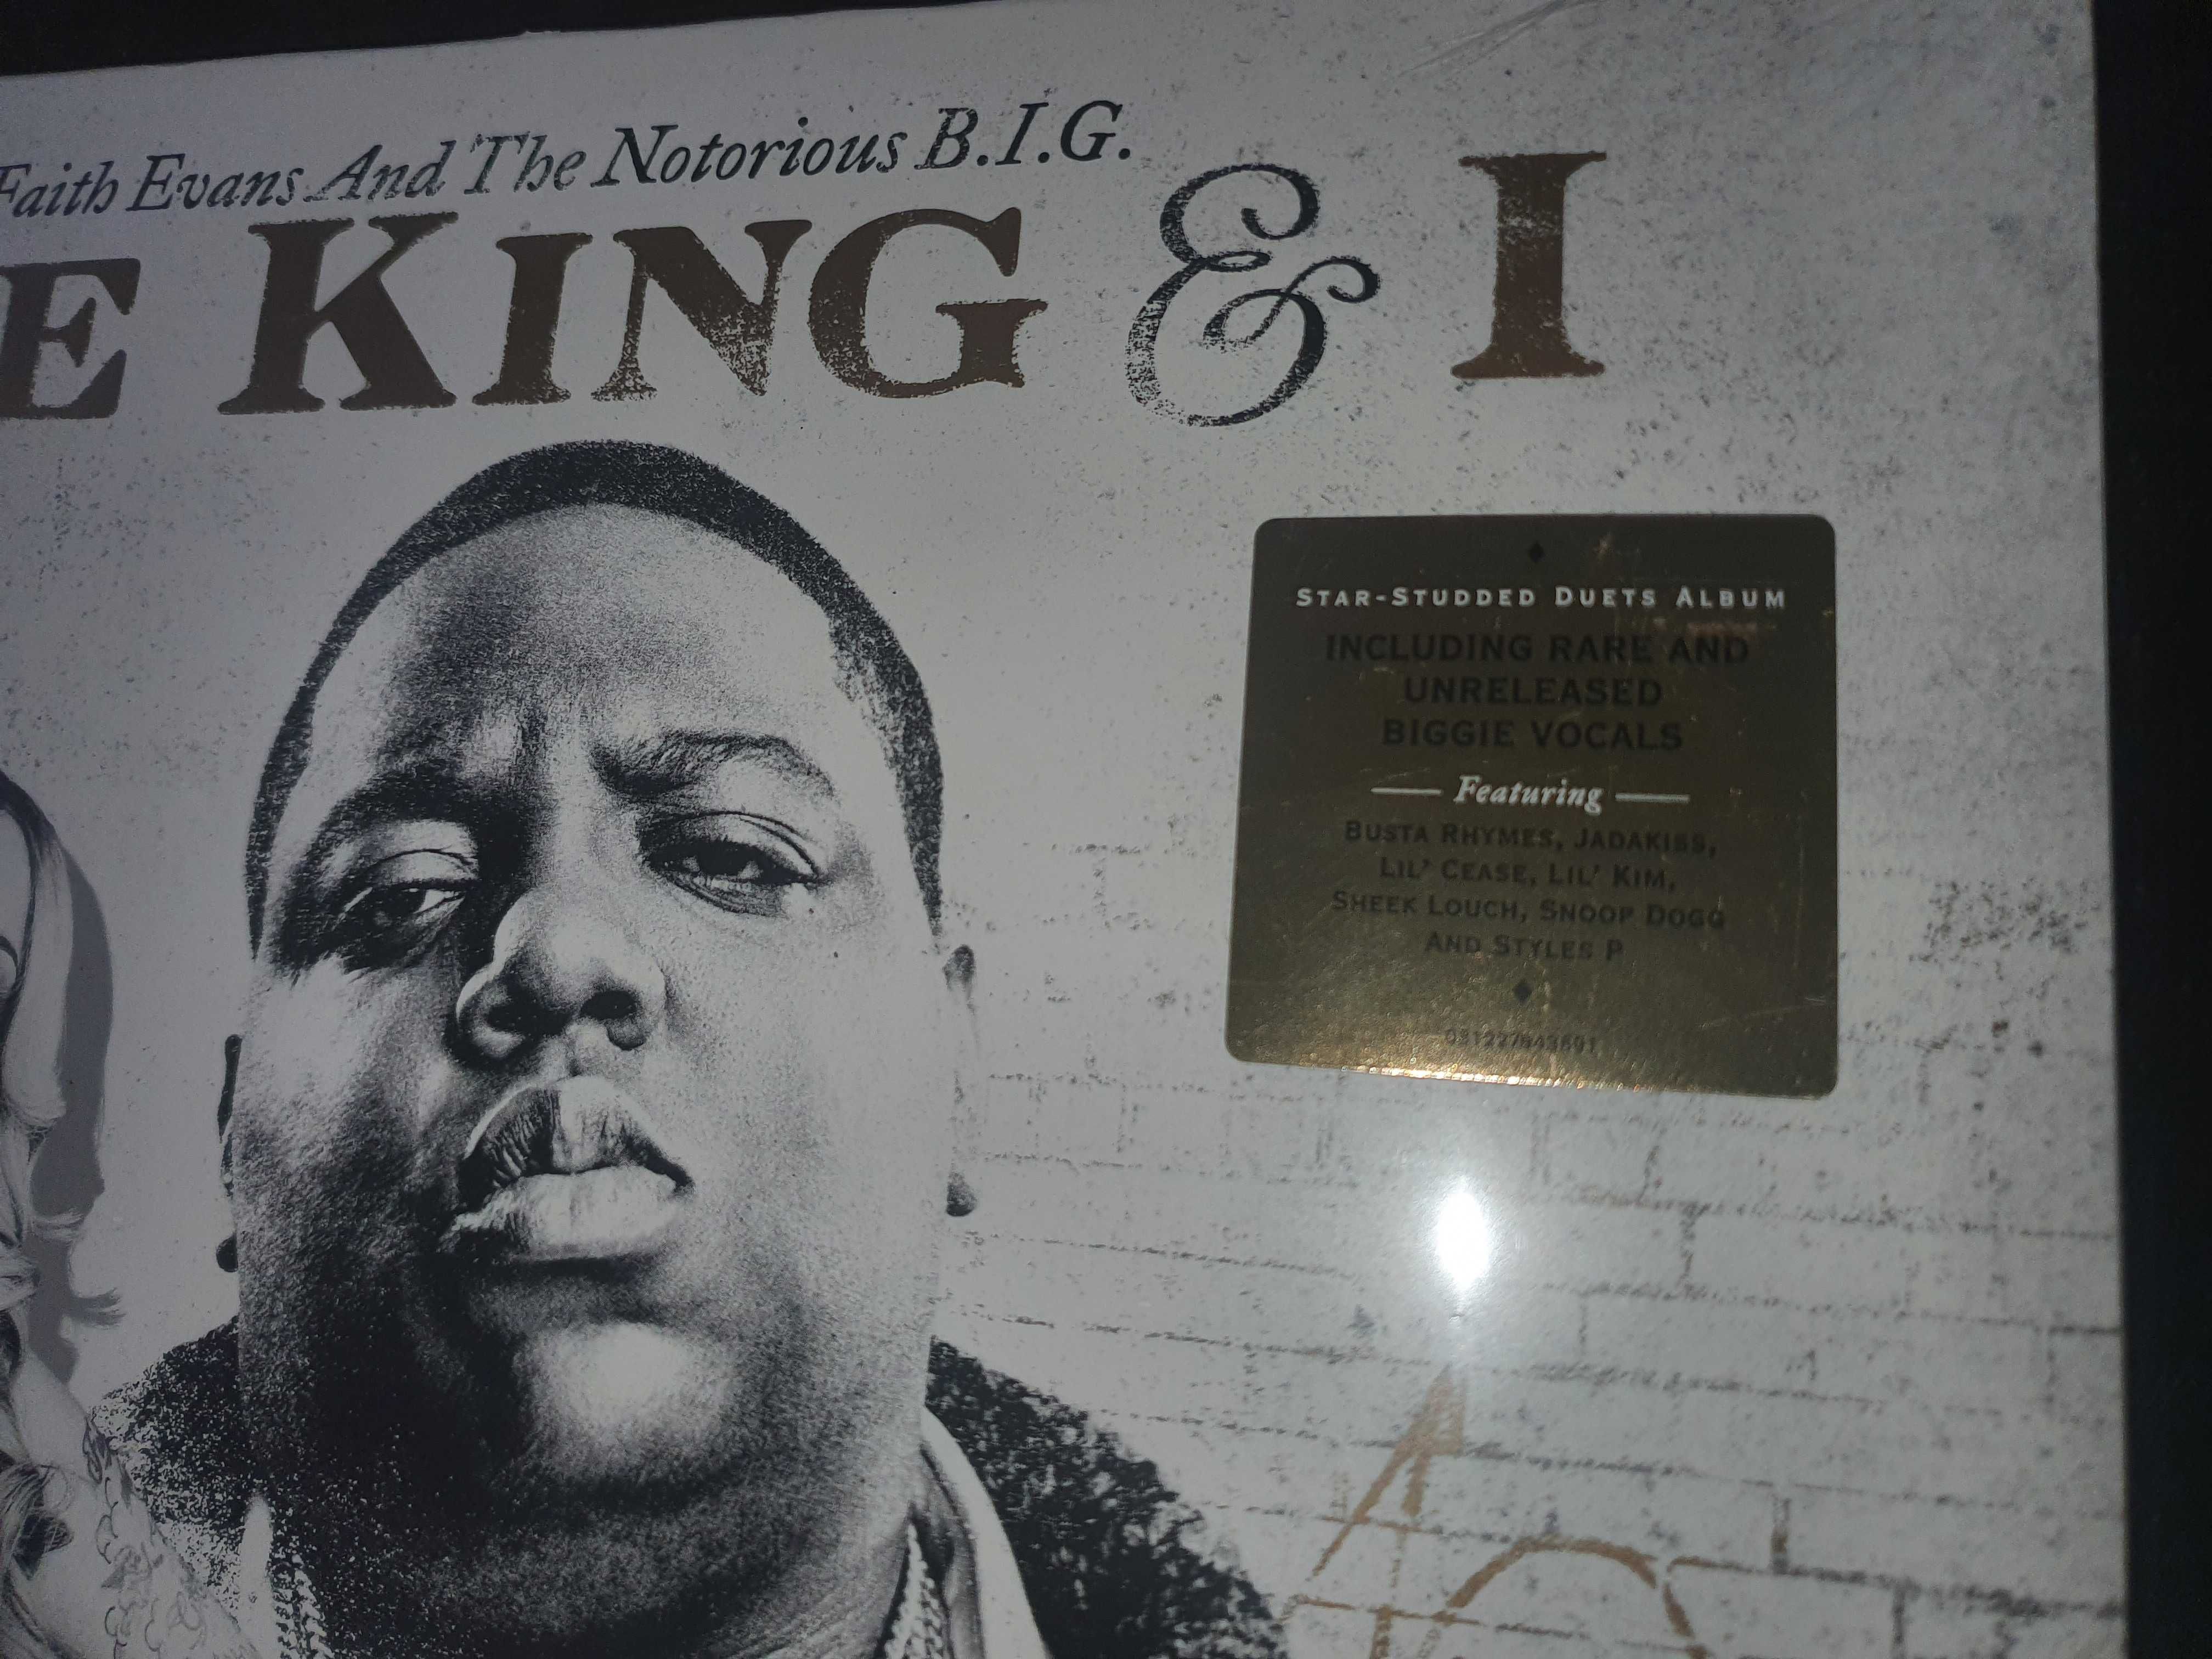 Faith Evans and The Notorious B.I.G.- The King and I / Winyl 2LP /